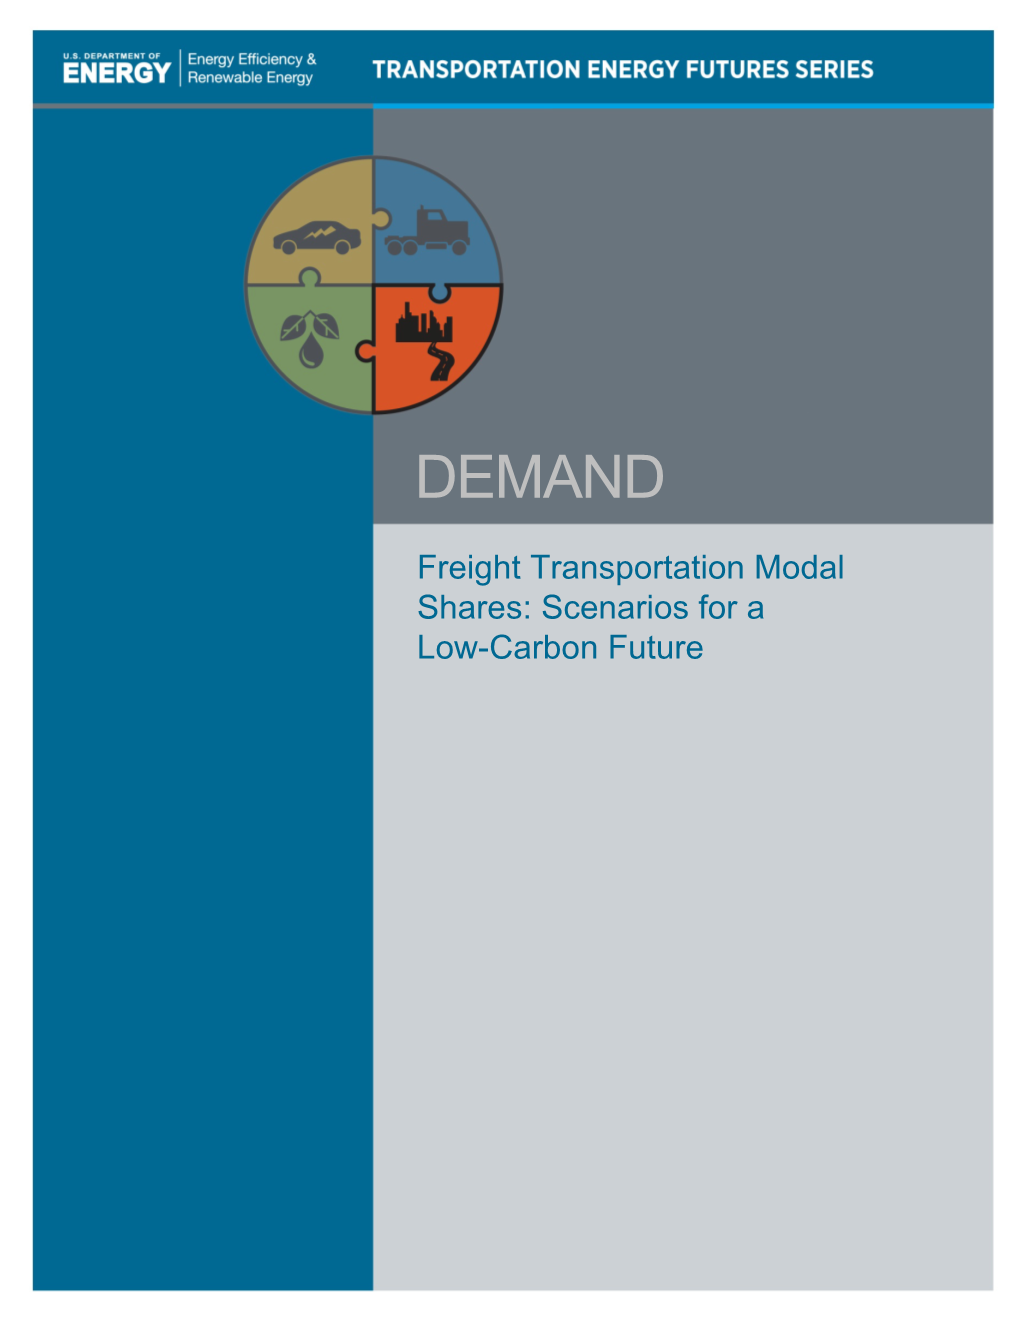 Freight Transportation Modal Shares: Scenarios for a Low-Carbon Future